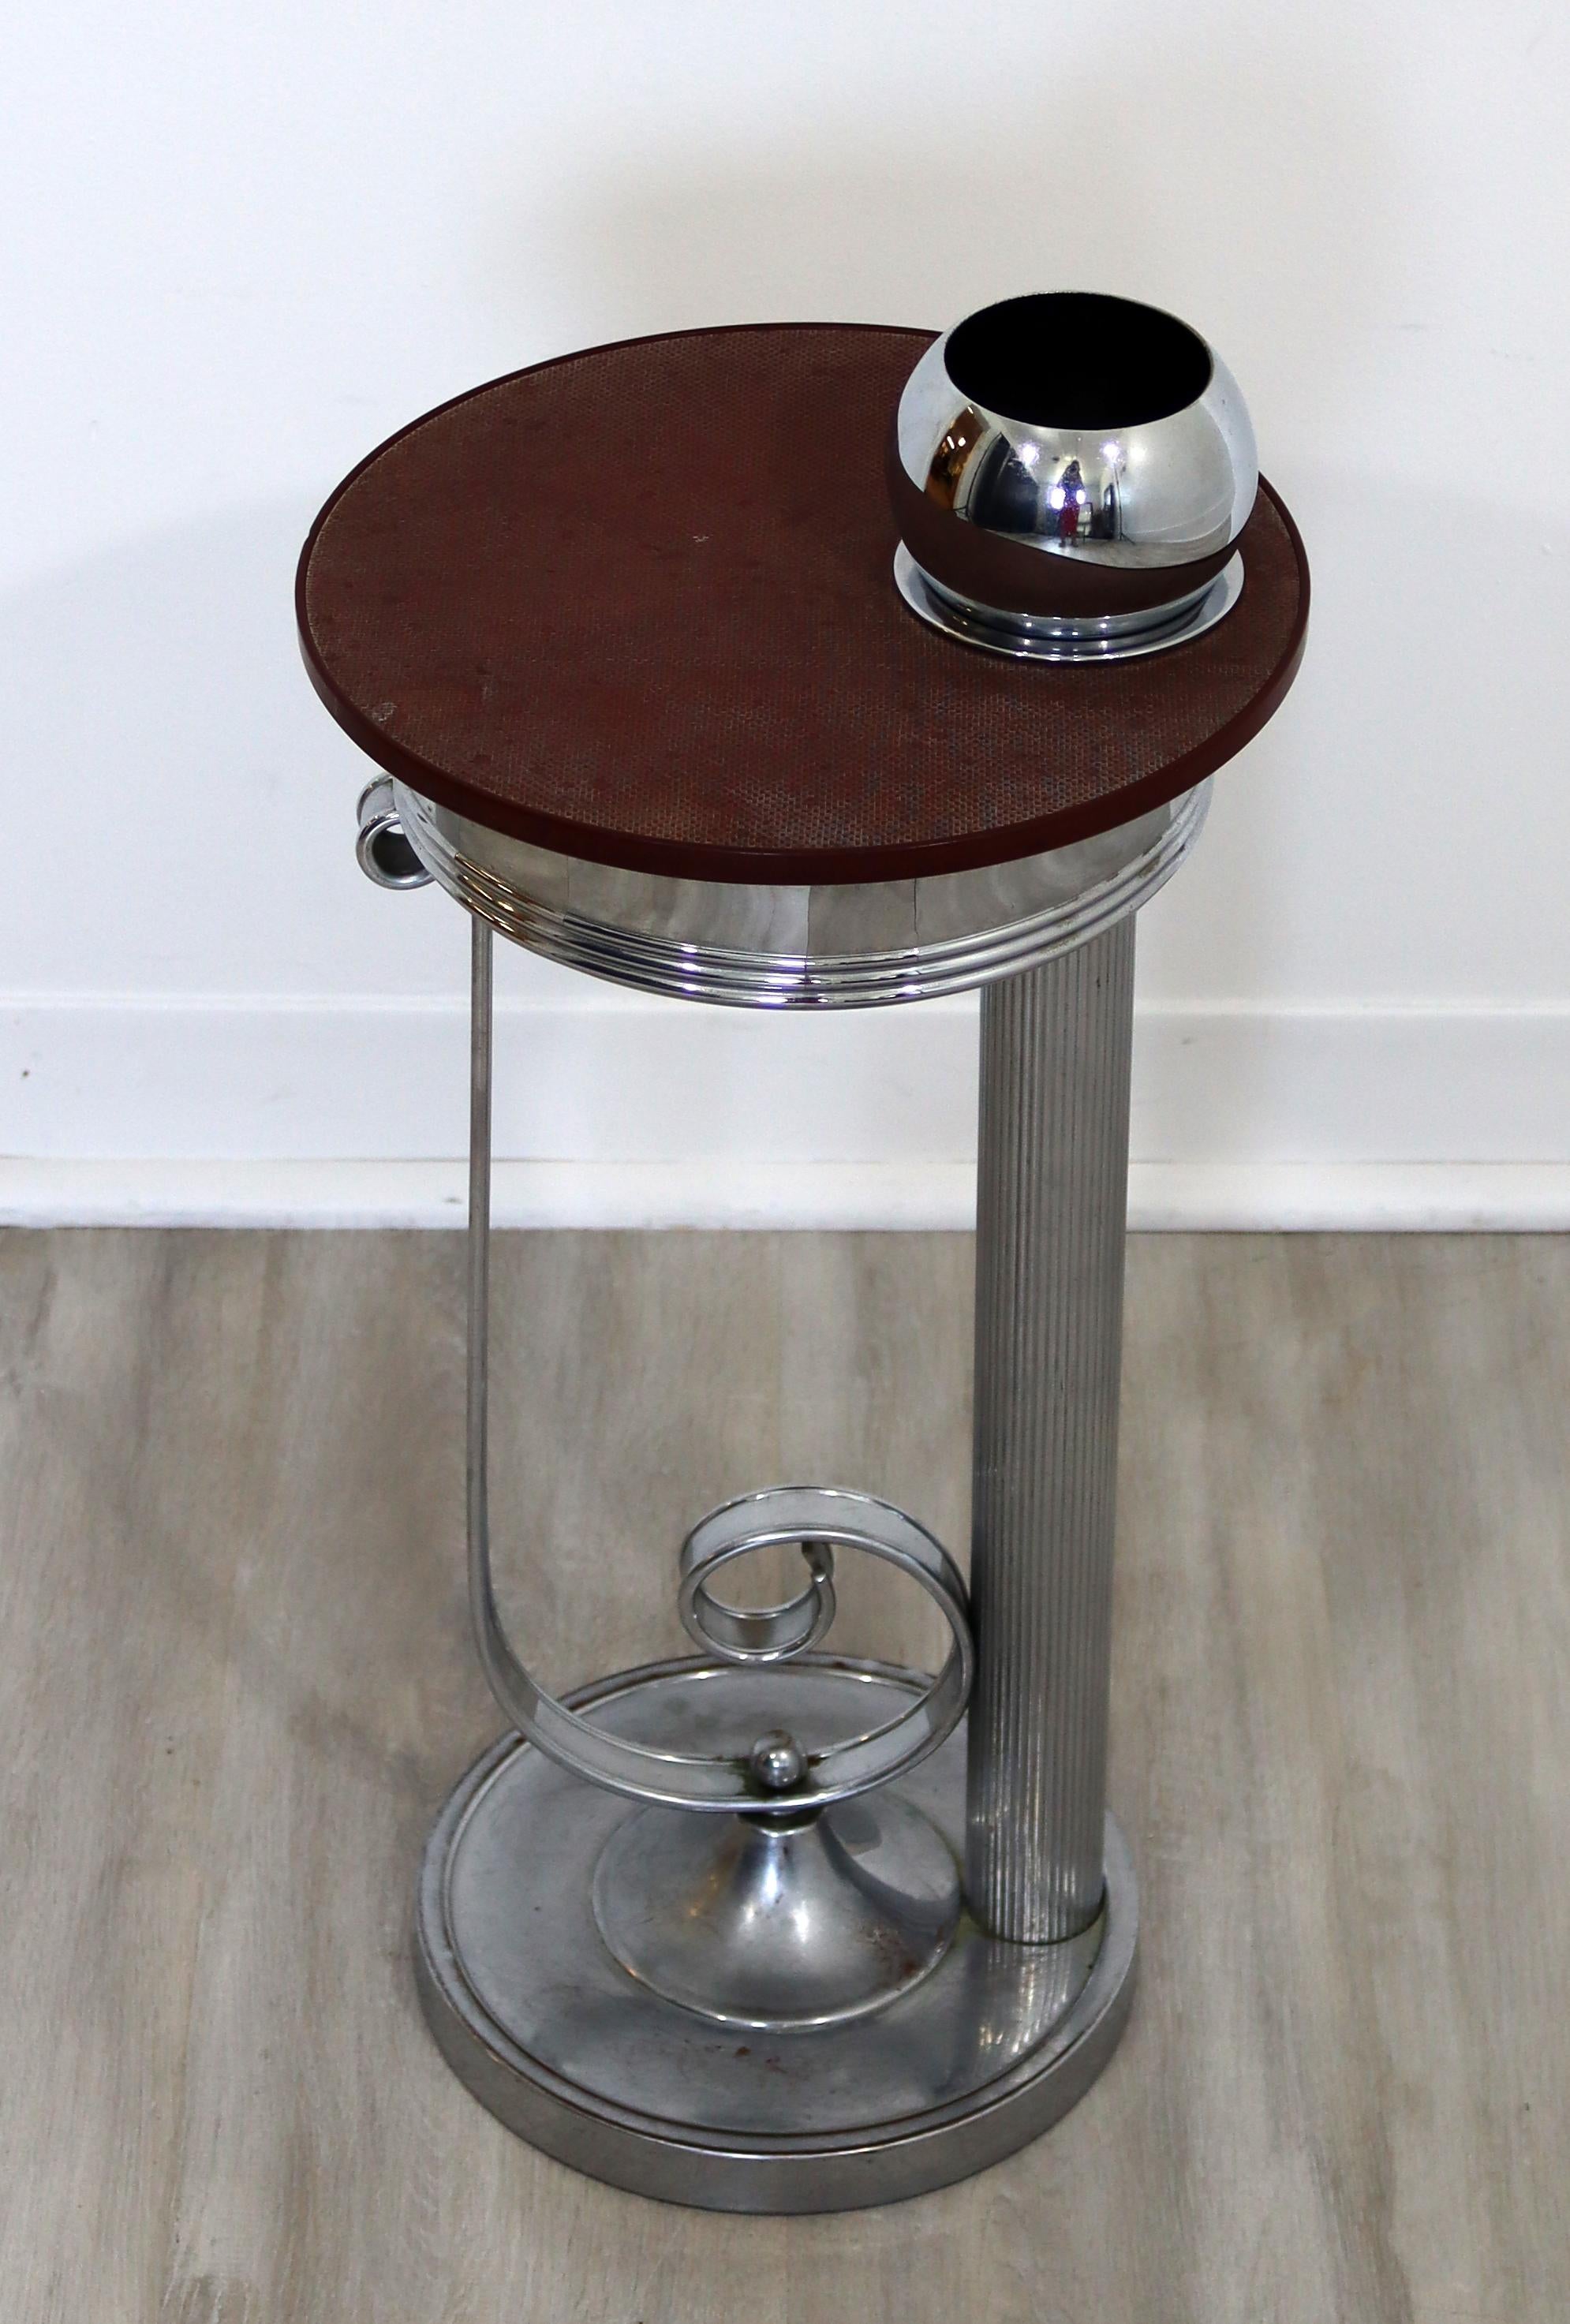 For your consideration is a fantastic standing ashtray or side end table, circa the 1920s 1930s. In excellent condition. The dimensions are 11